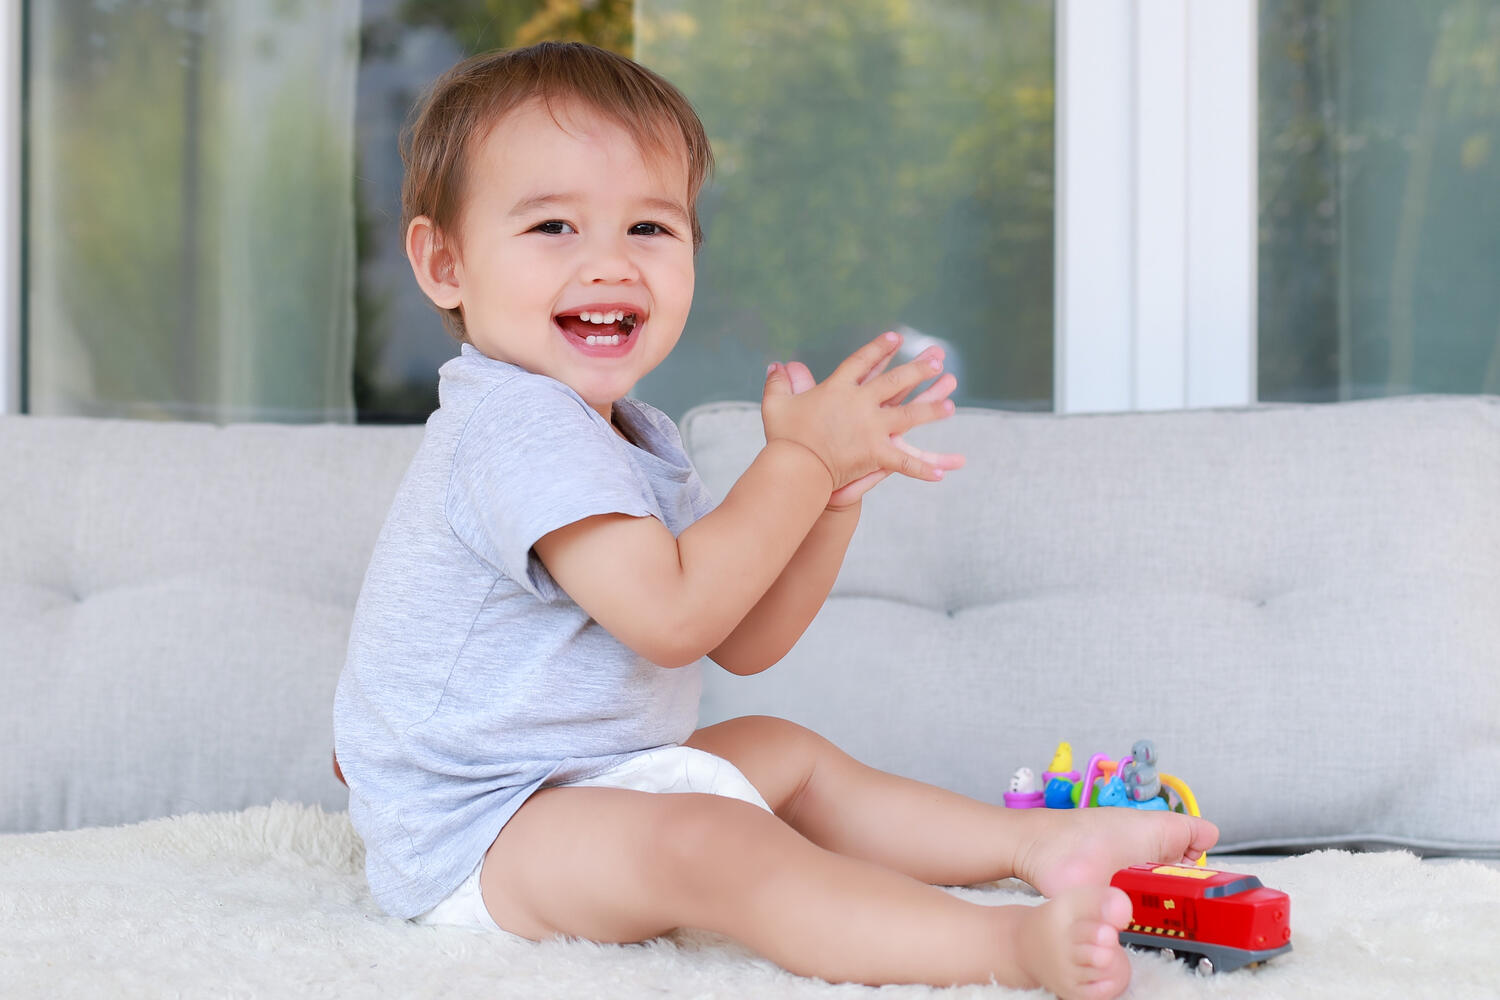 Toddler touching genitals is part of their development and natural curiosity